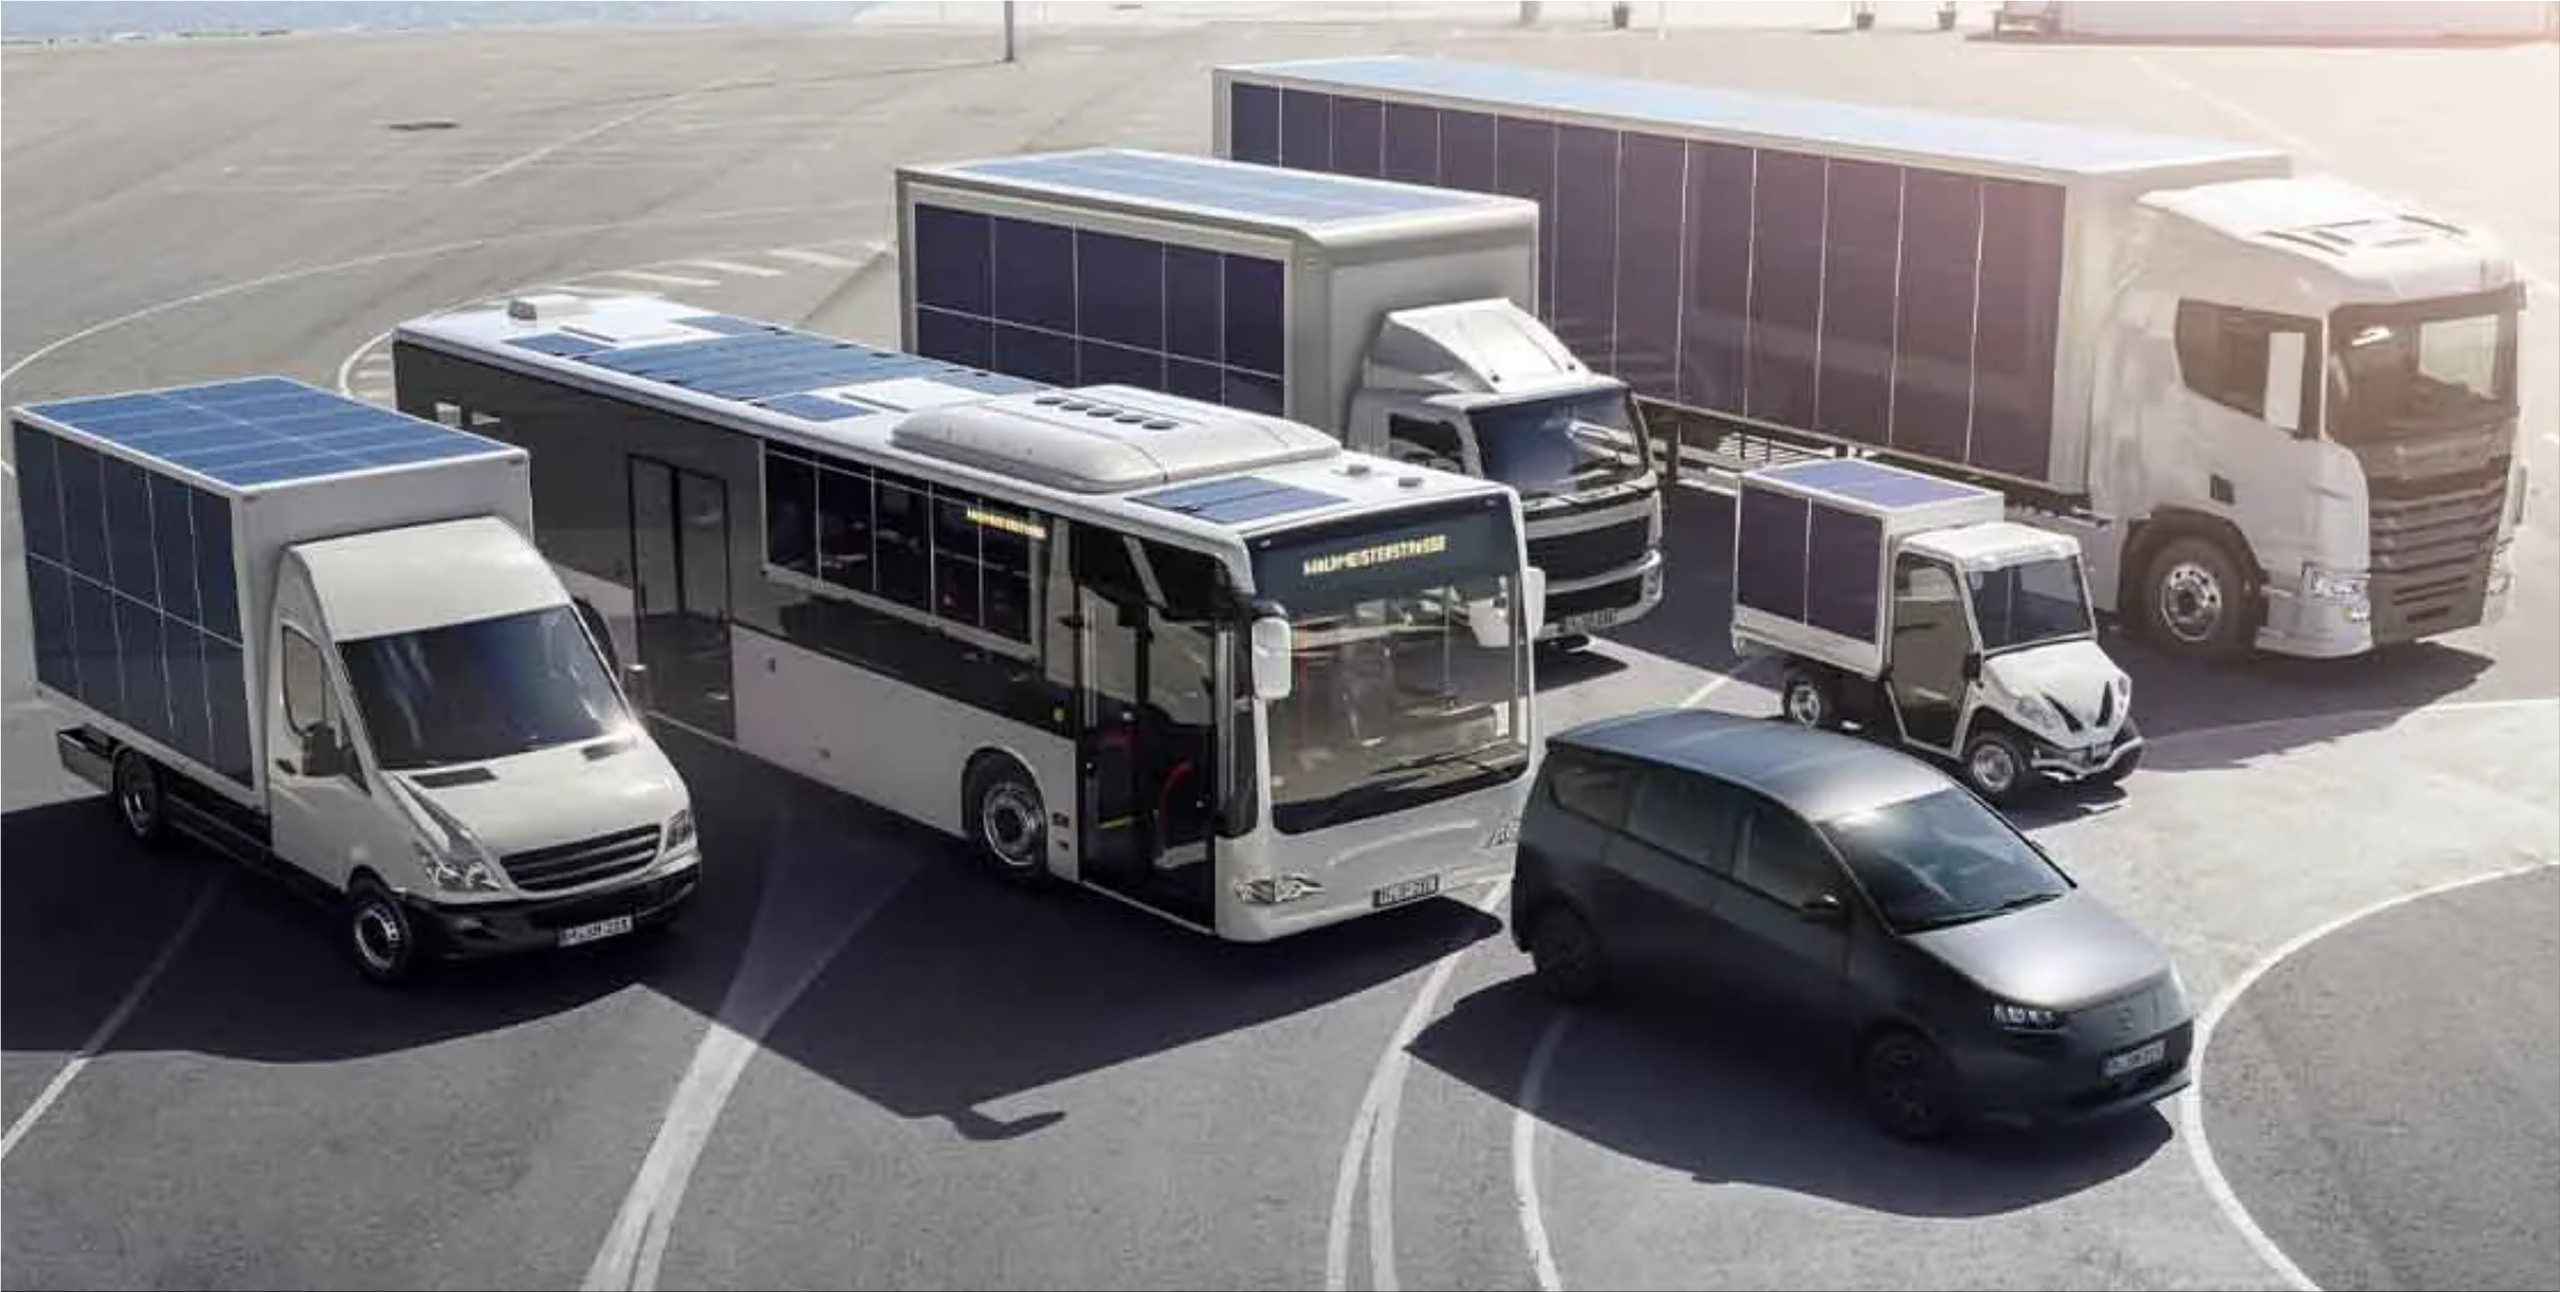 Over 32,000 solar-powered EVs from Sono Motors will hit the road